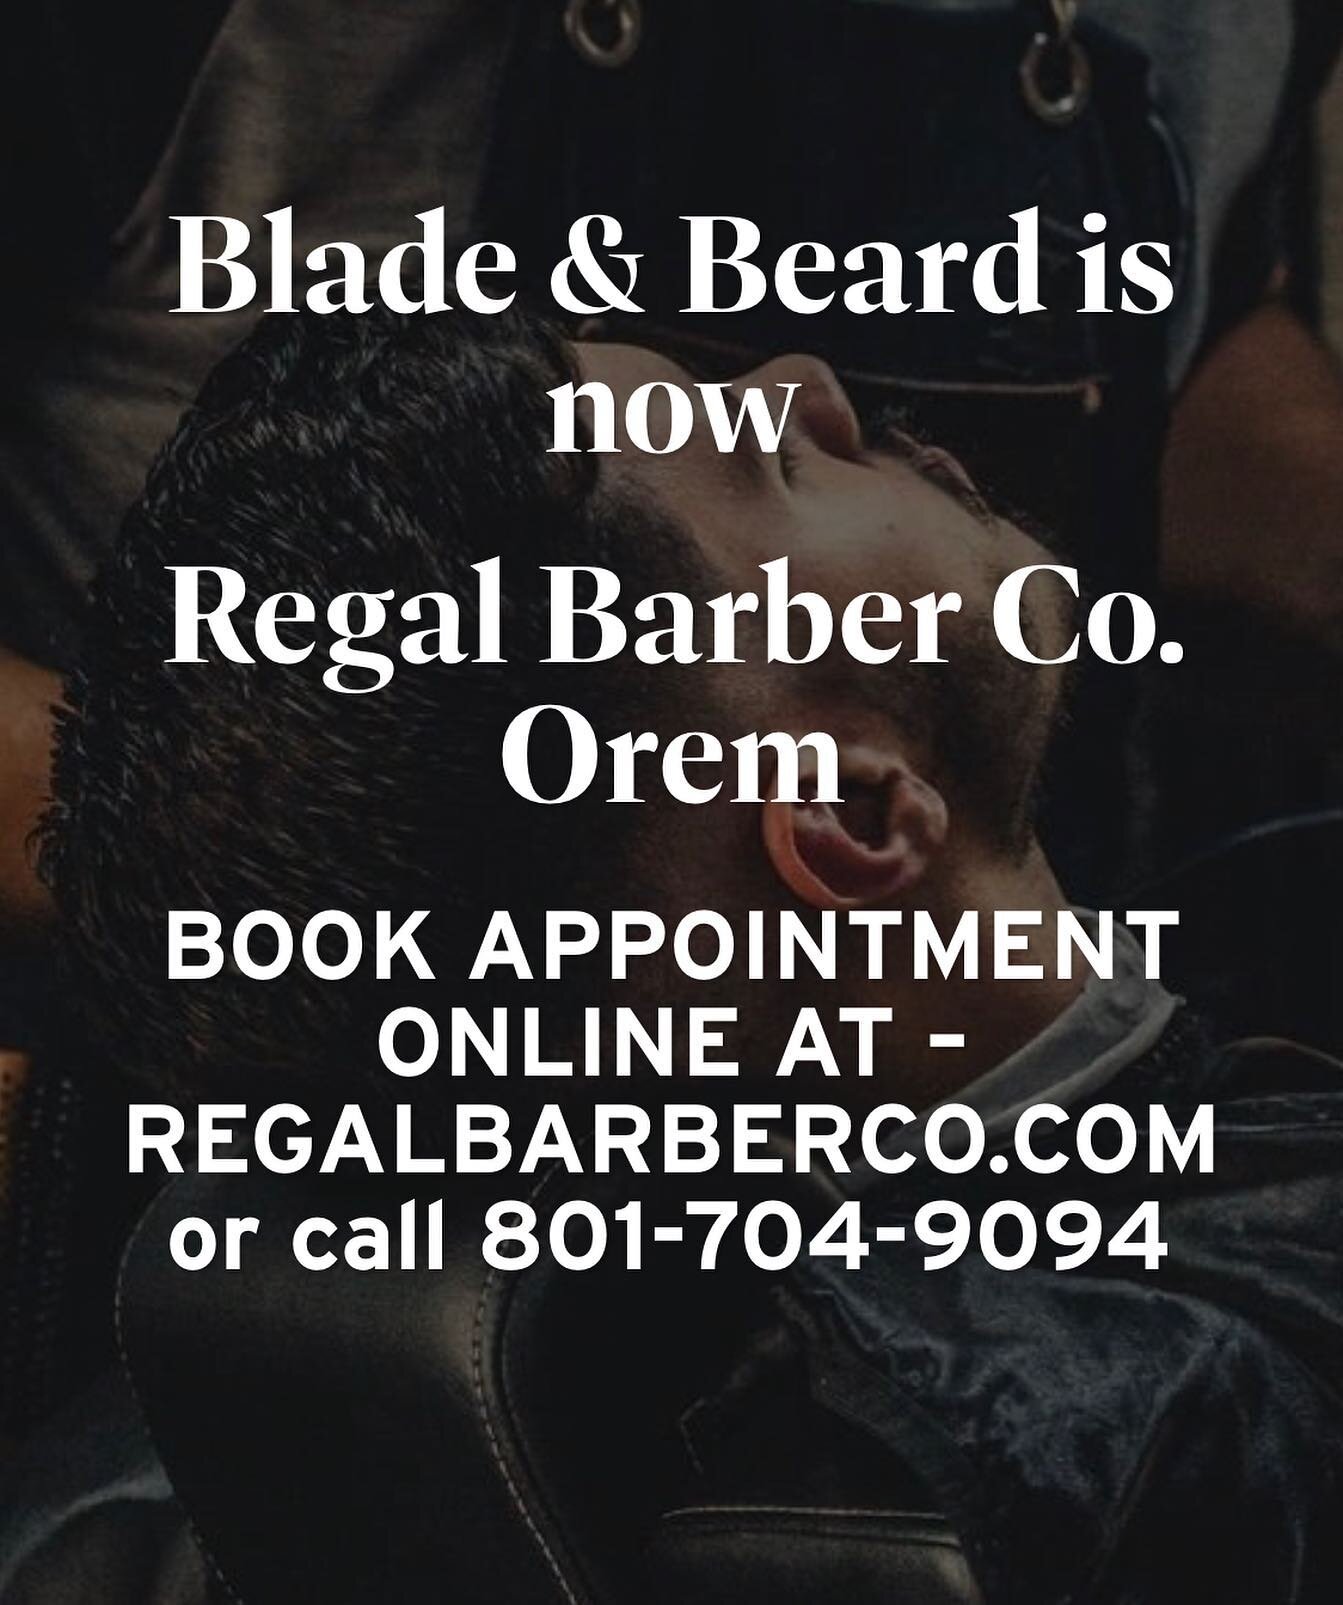 Blade &amp; Beard Orem is becoming @regalbarberco Orem. Our barbers are excited about this transition as @blade.beard moves home to Oklahoma in August. @mr.regal is going to bring awesome leadership and experience to Utah County. 
You can now book ap